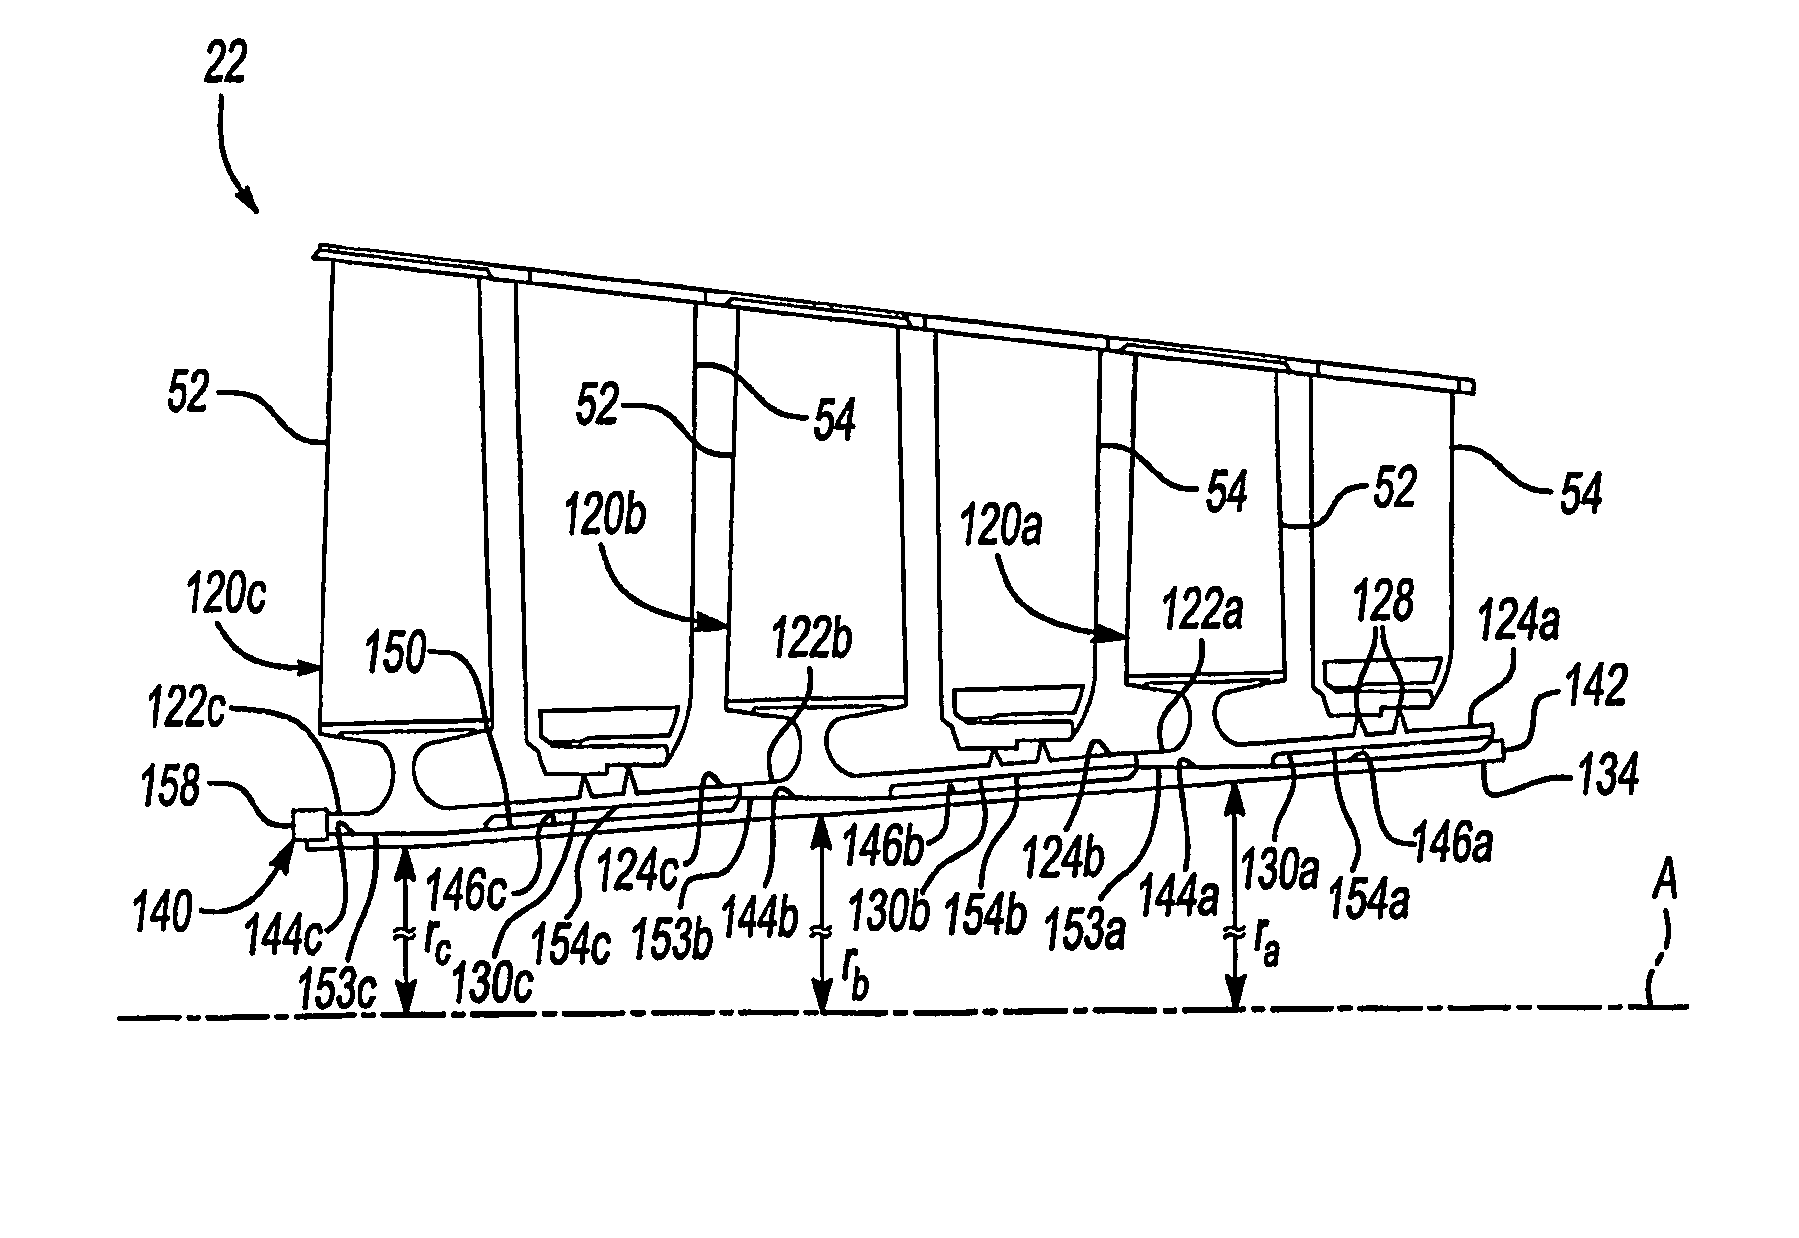 Stacked annular components for turbine engines